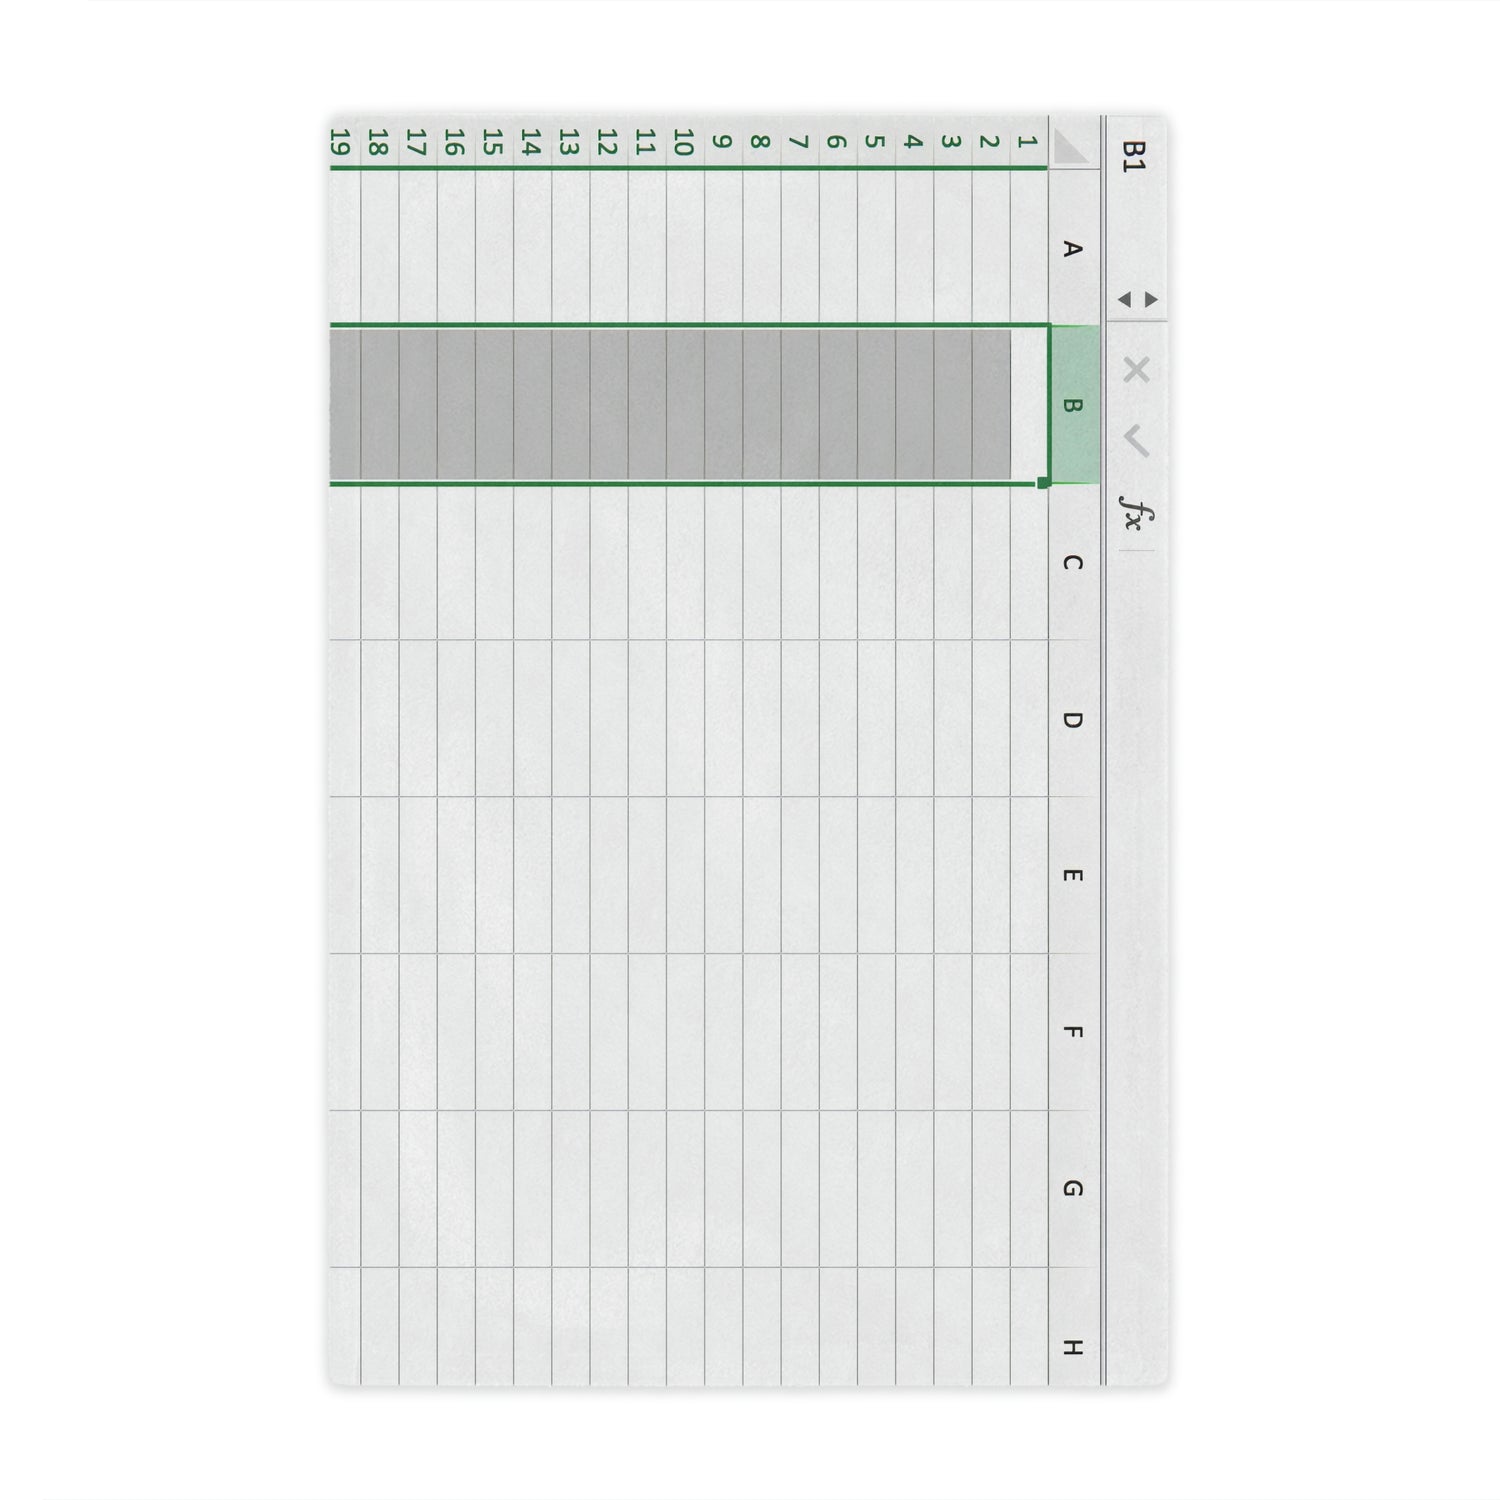 Excel Spread Sheet Blanket -Pun Gift Lord and Lady Towers